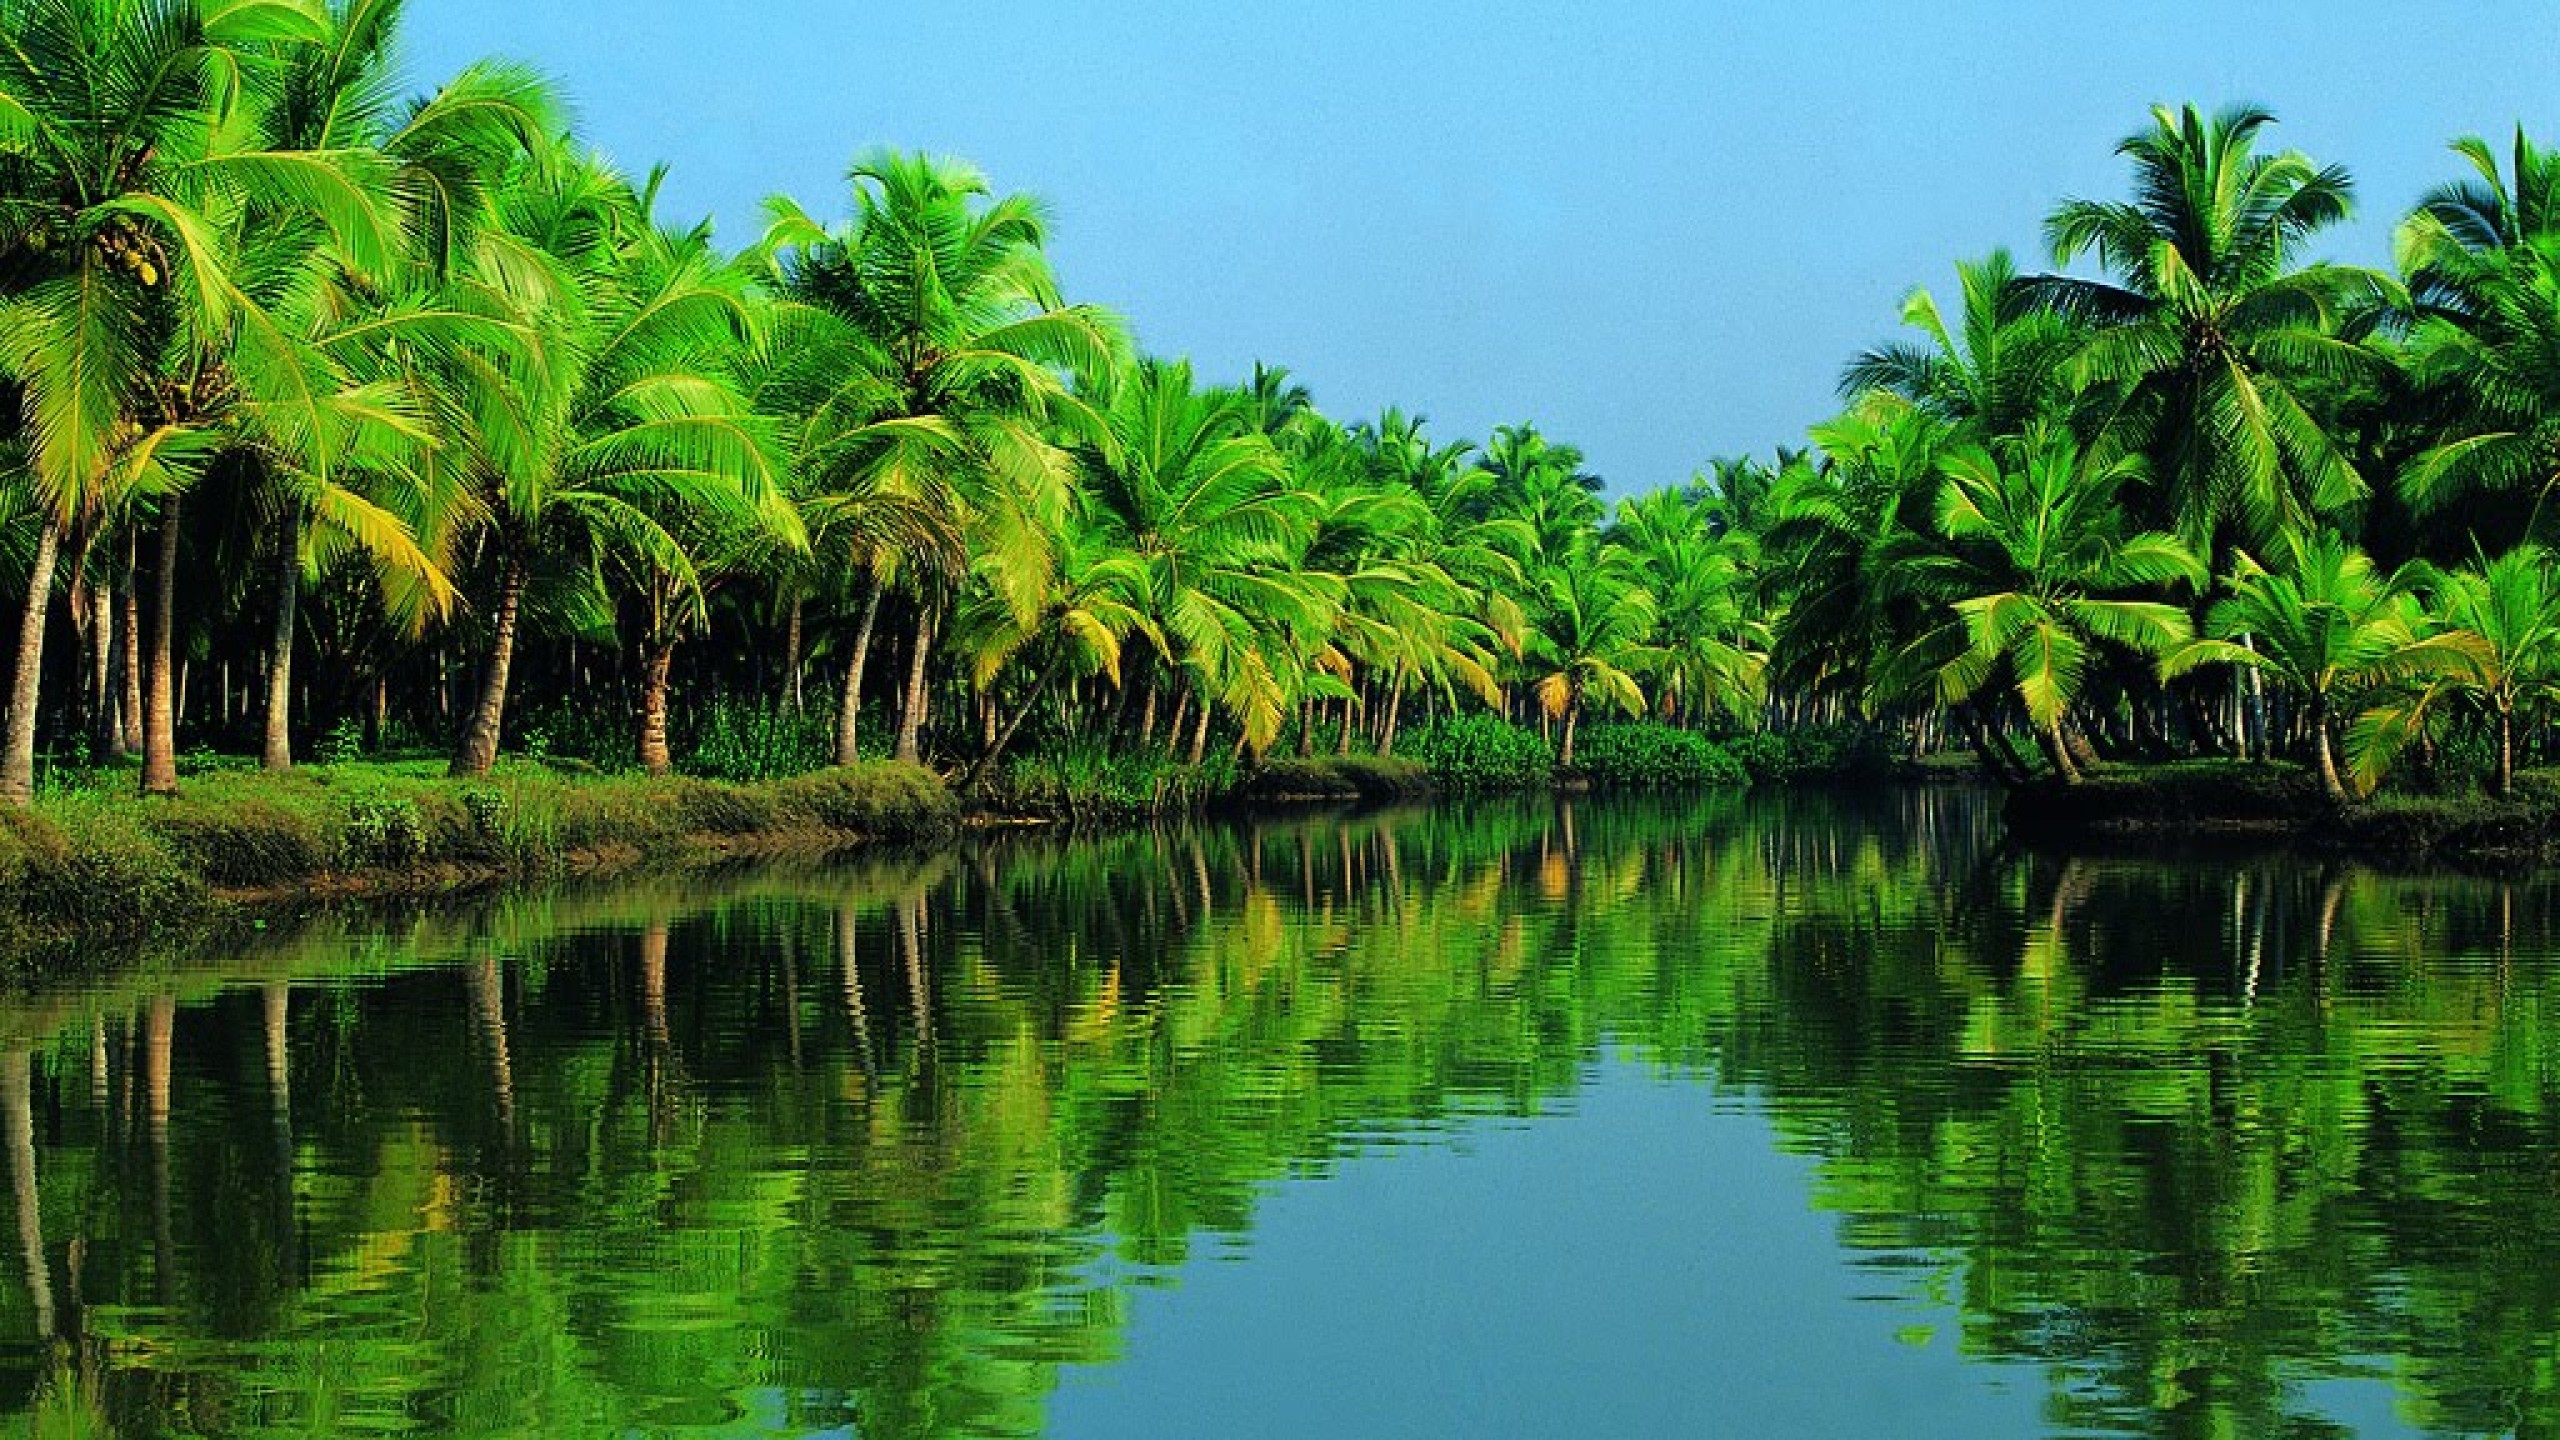 2560x1440 Desktop Lake With Palm Trees Wallpaper Background